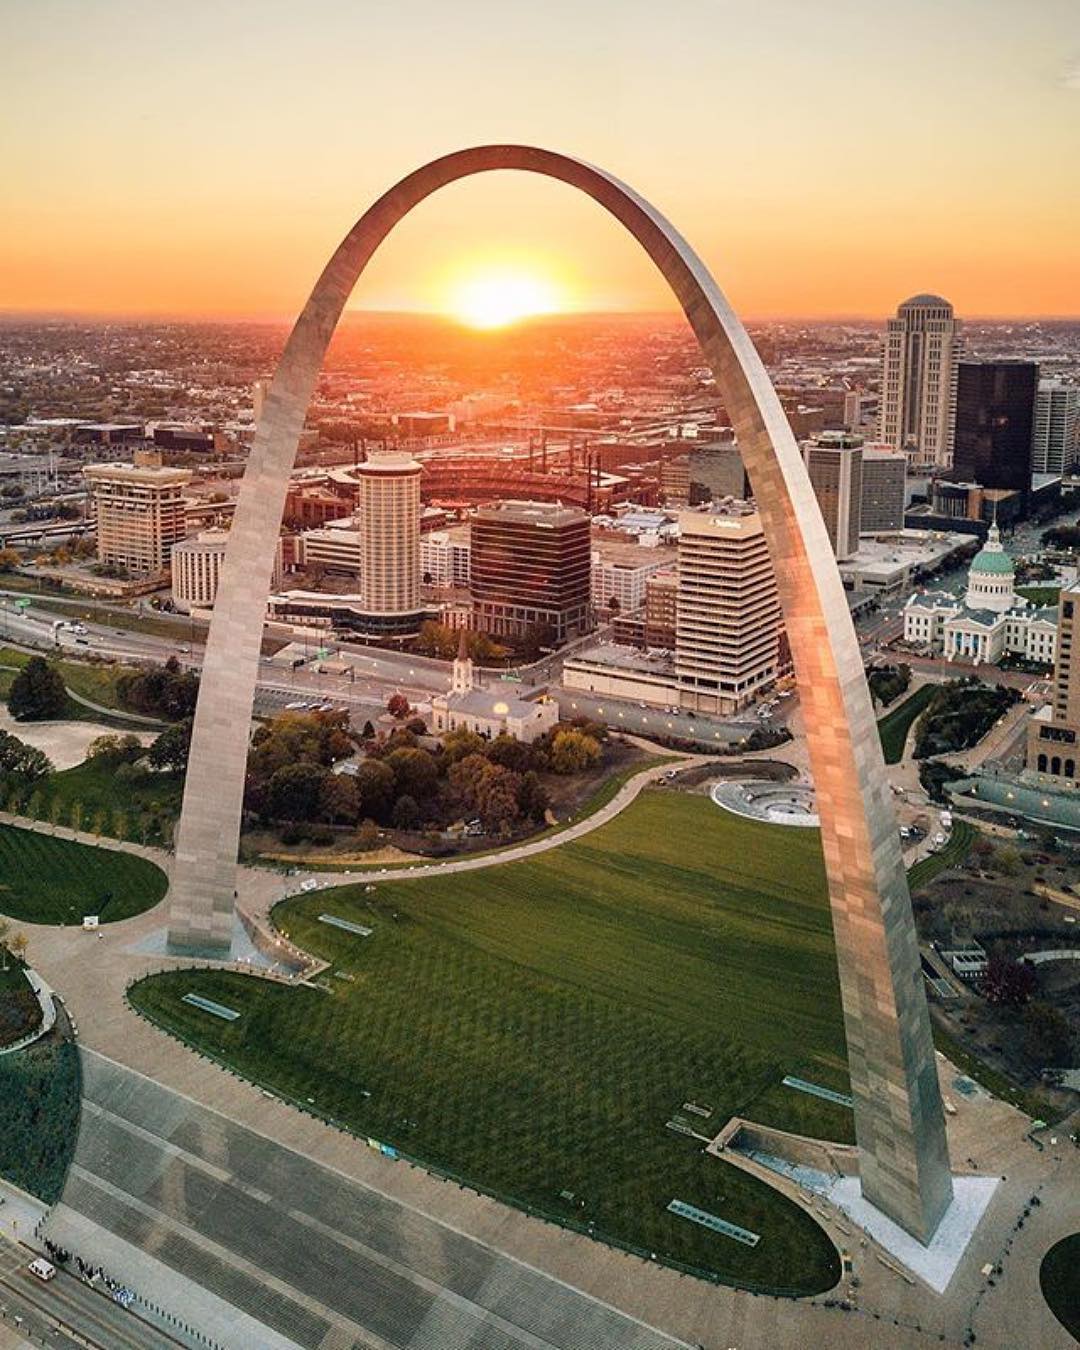 An aerial view of the St. Louis Gateway Arch with the sunset in the distance. Photo by Instagram user @explorestlouis